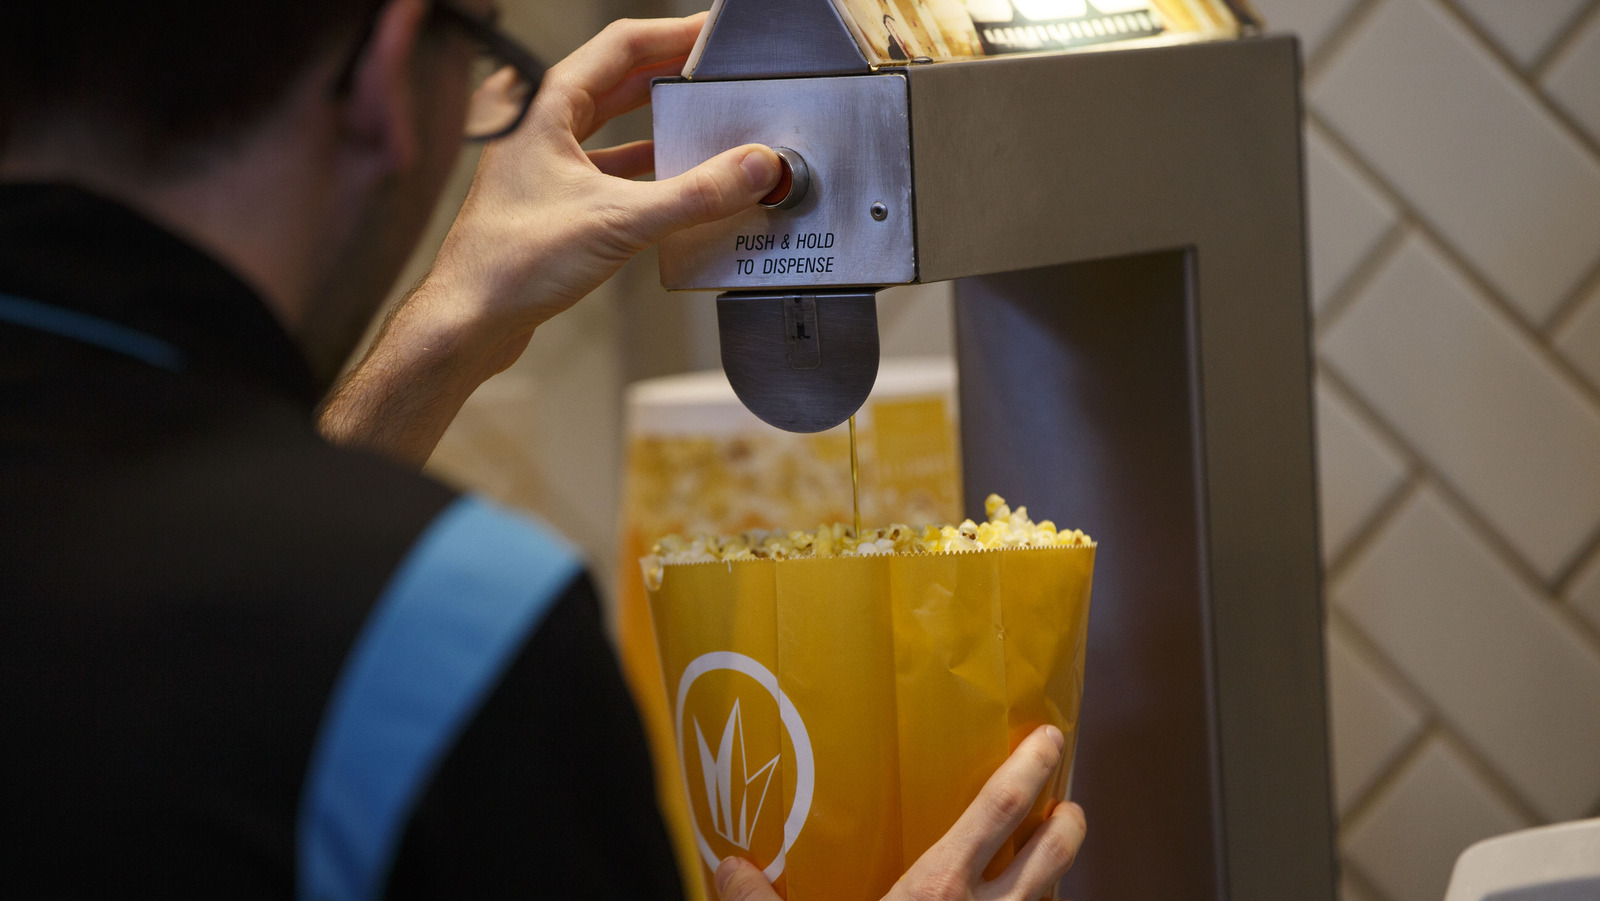 https://www.mashed.com/img/gallery/this-surprising-item-is-the-key-to-perfectly-buttered-movie-theater-popcorn/l-intro-1616904129.jpg